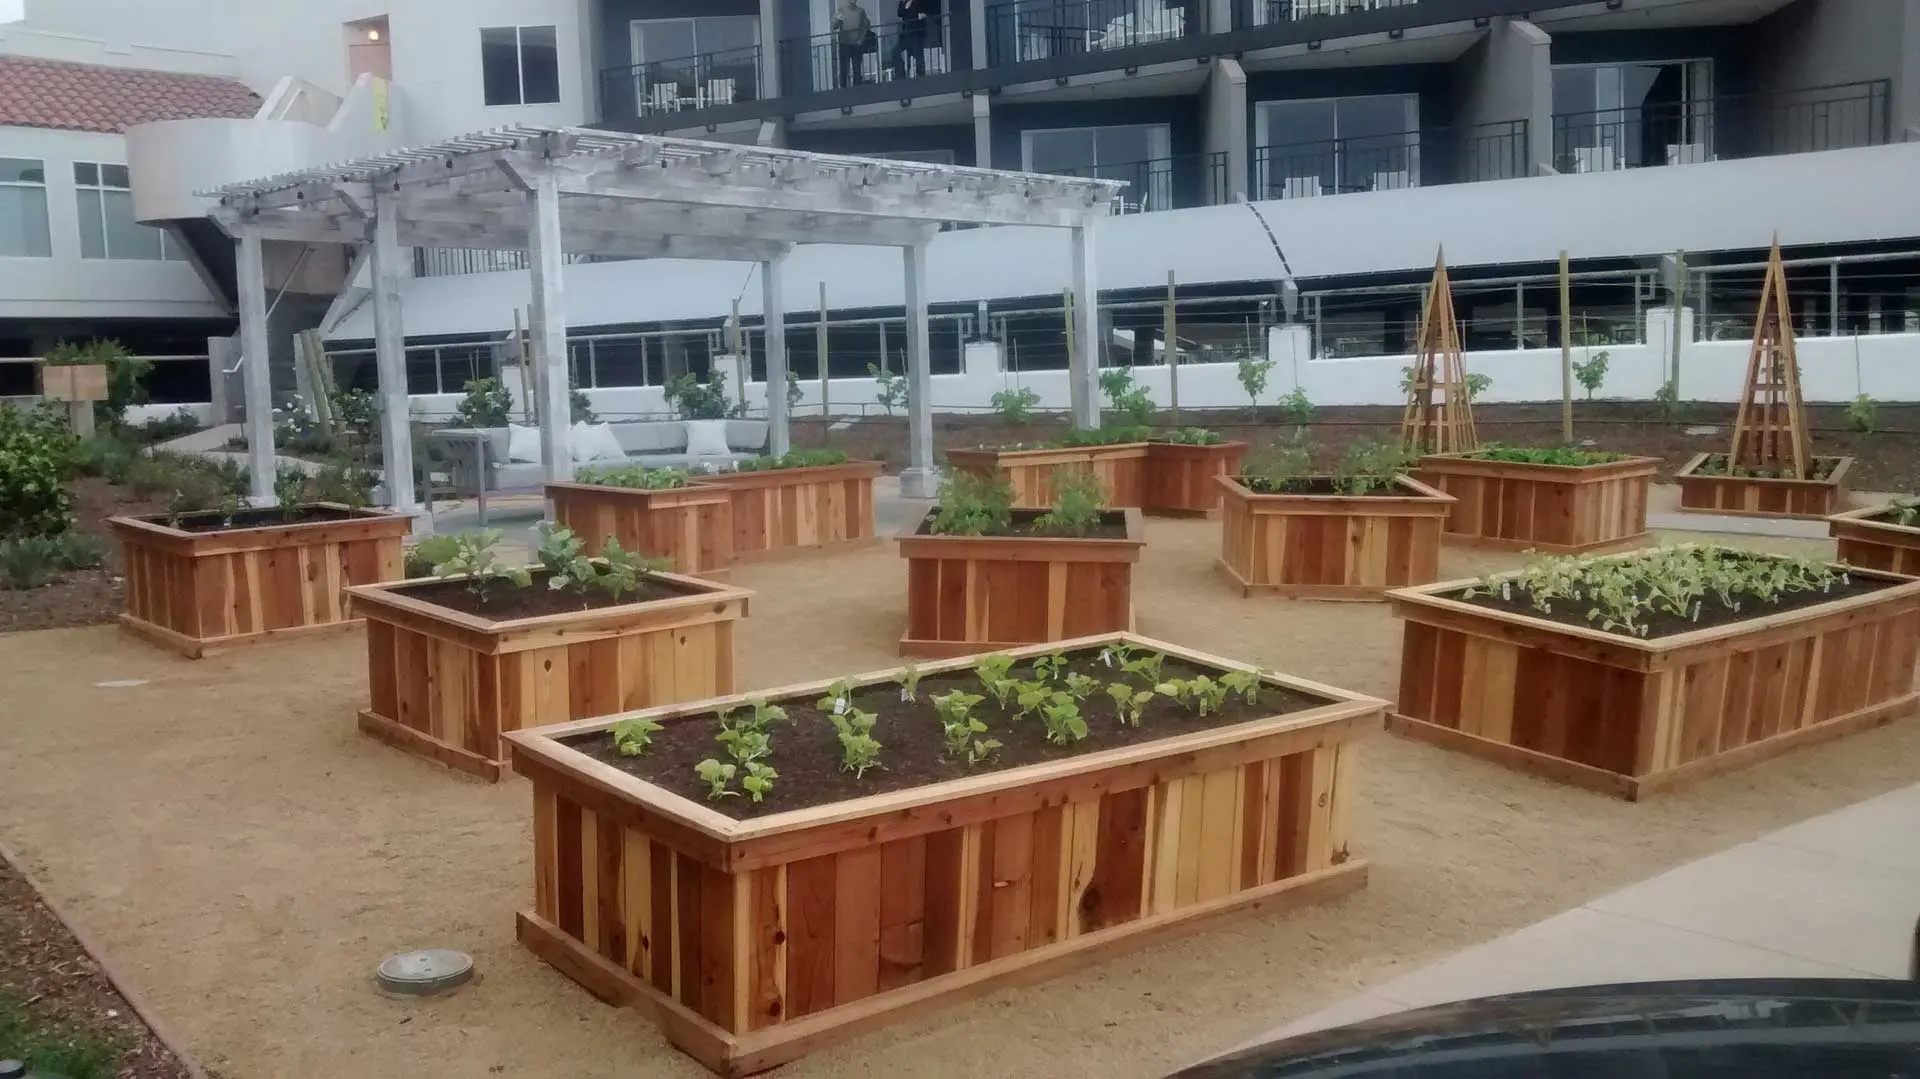 A wooden raised garden bed in front of a building.